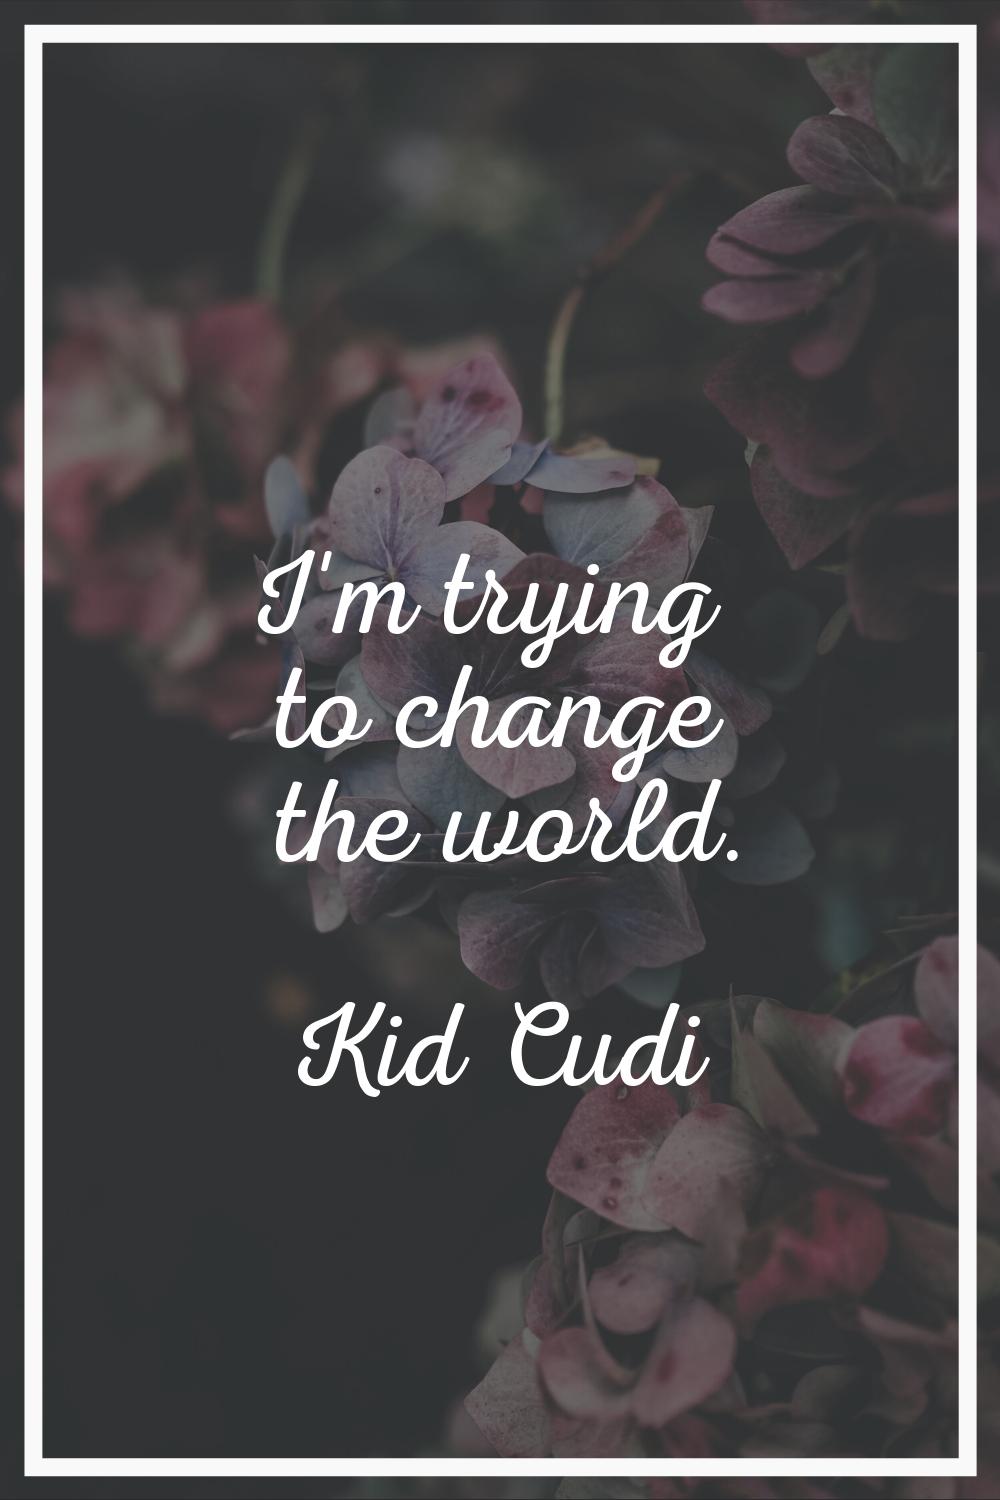 I'm trying to change the world.